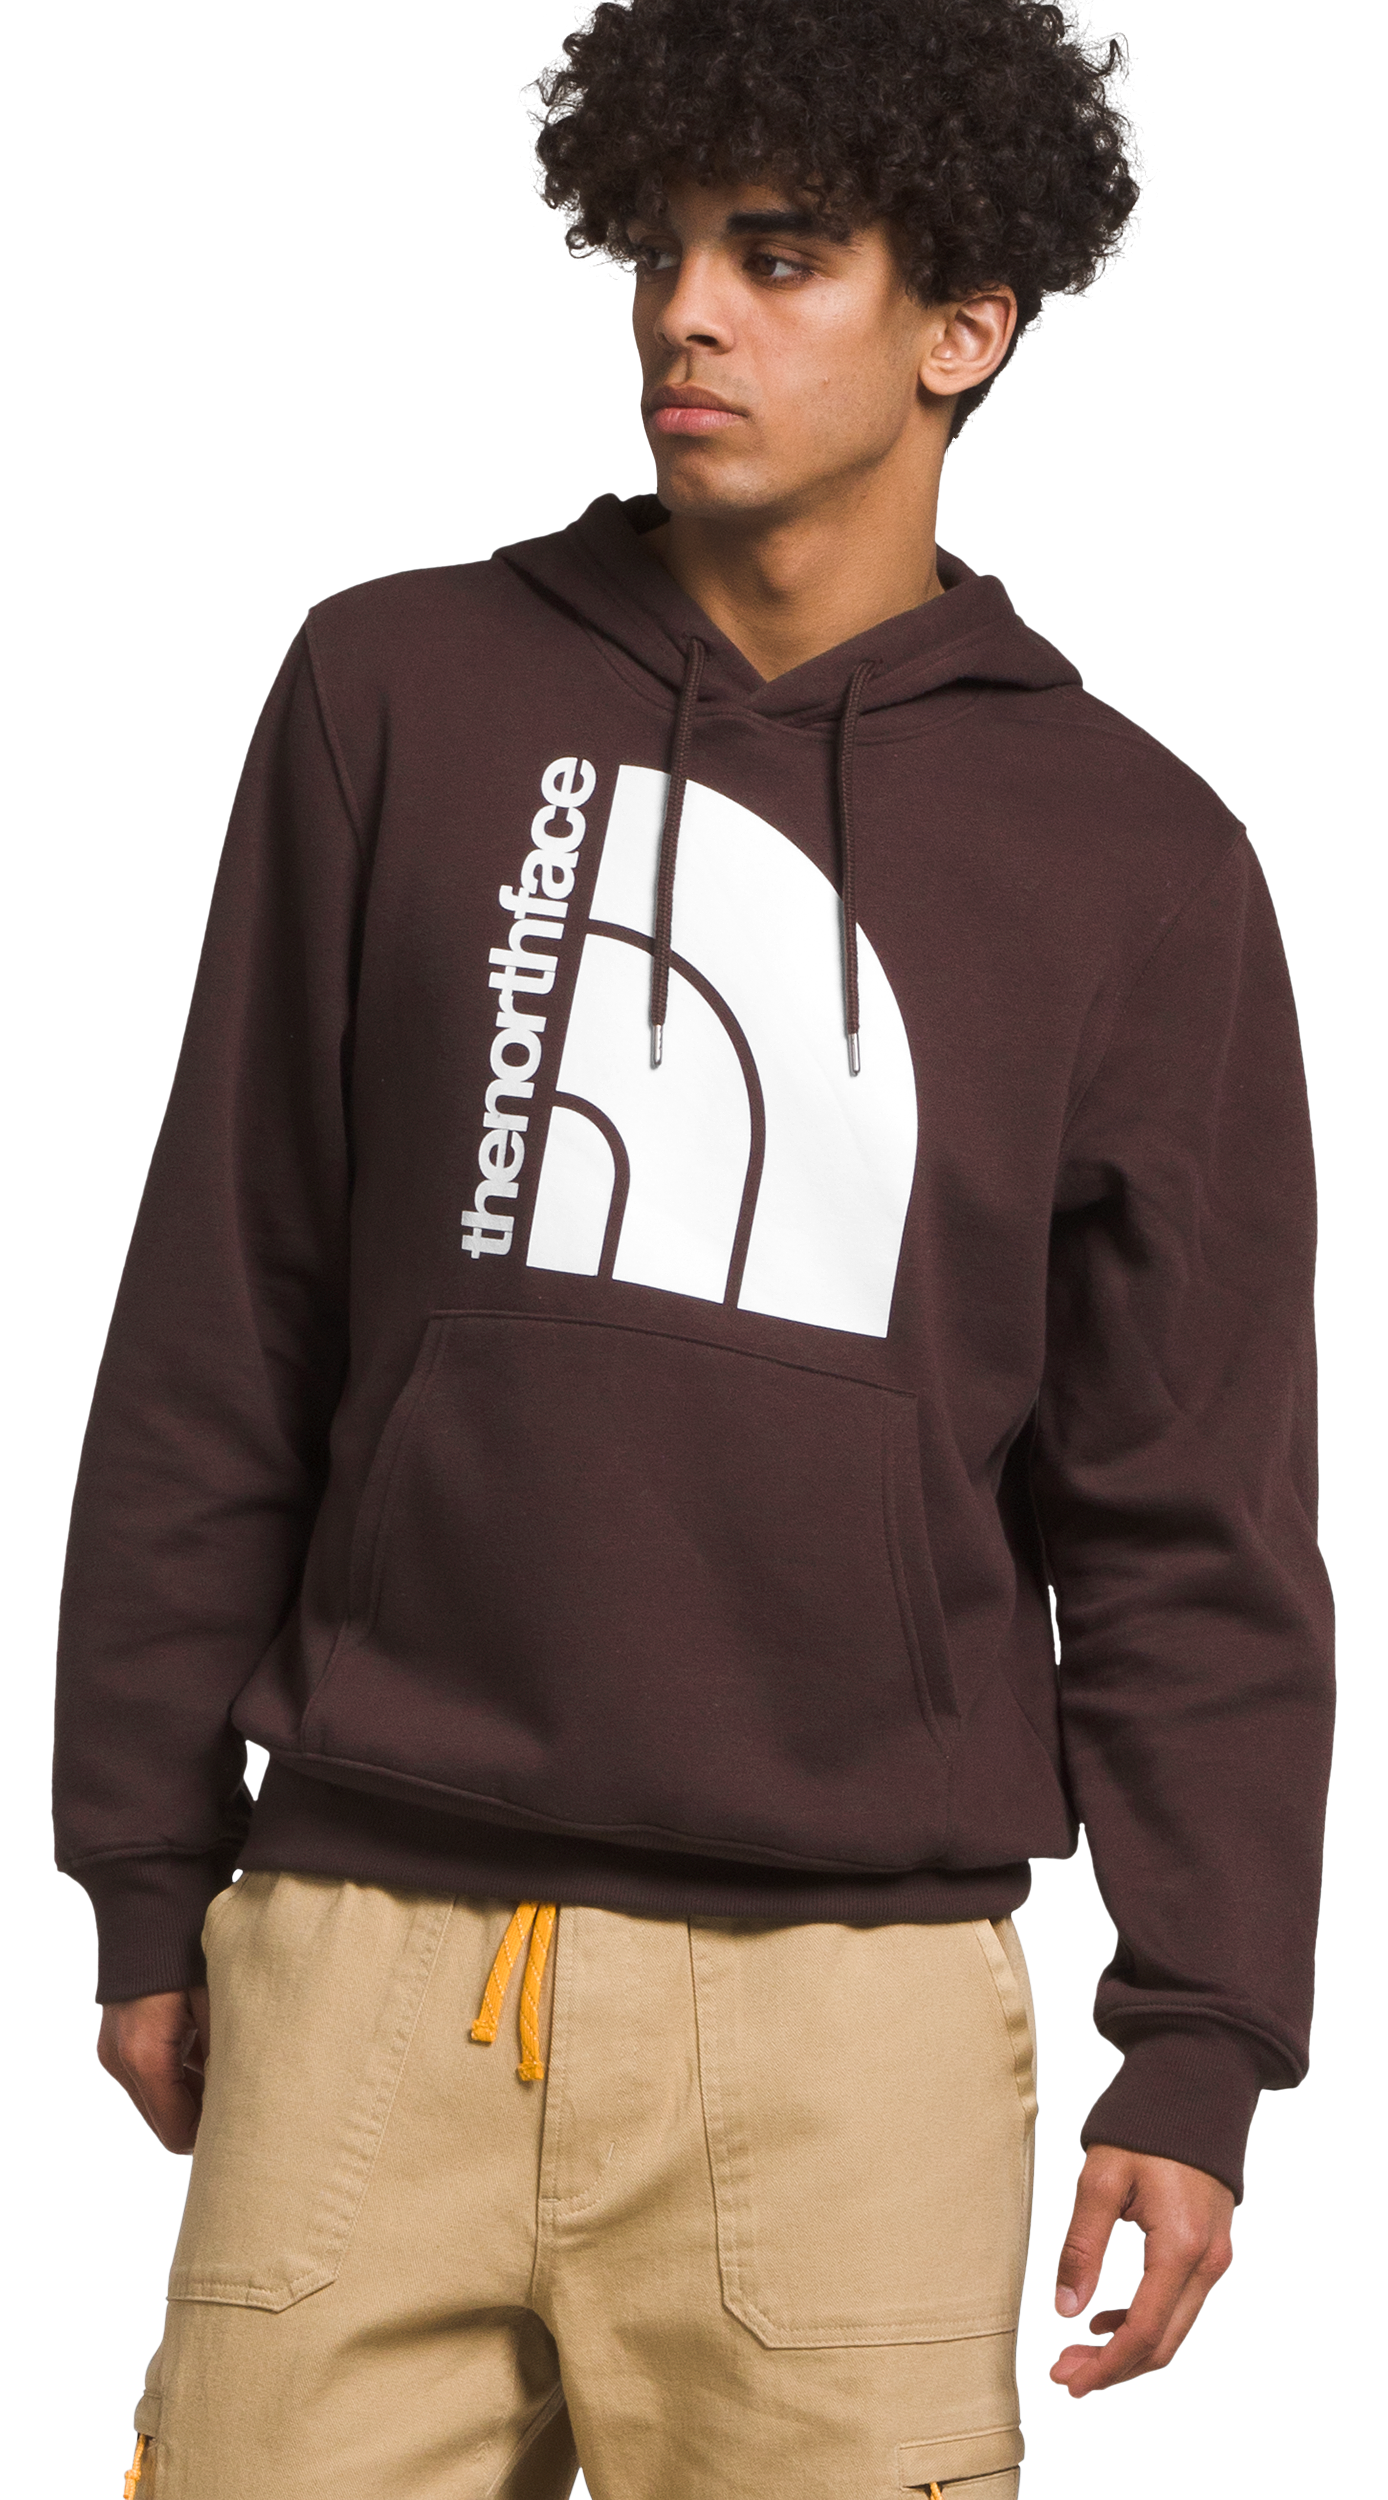 The North Face Jumbo Half Dome Long-Sleeve Hoodie for Men - Coal Brown/TNF White - S